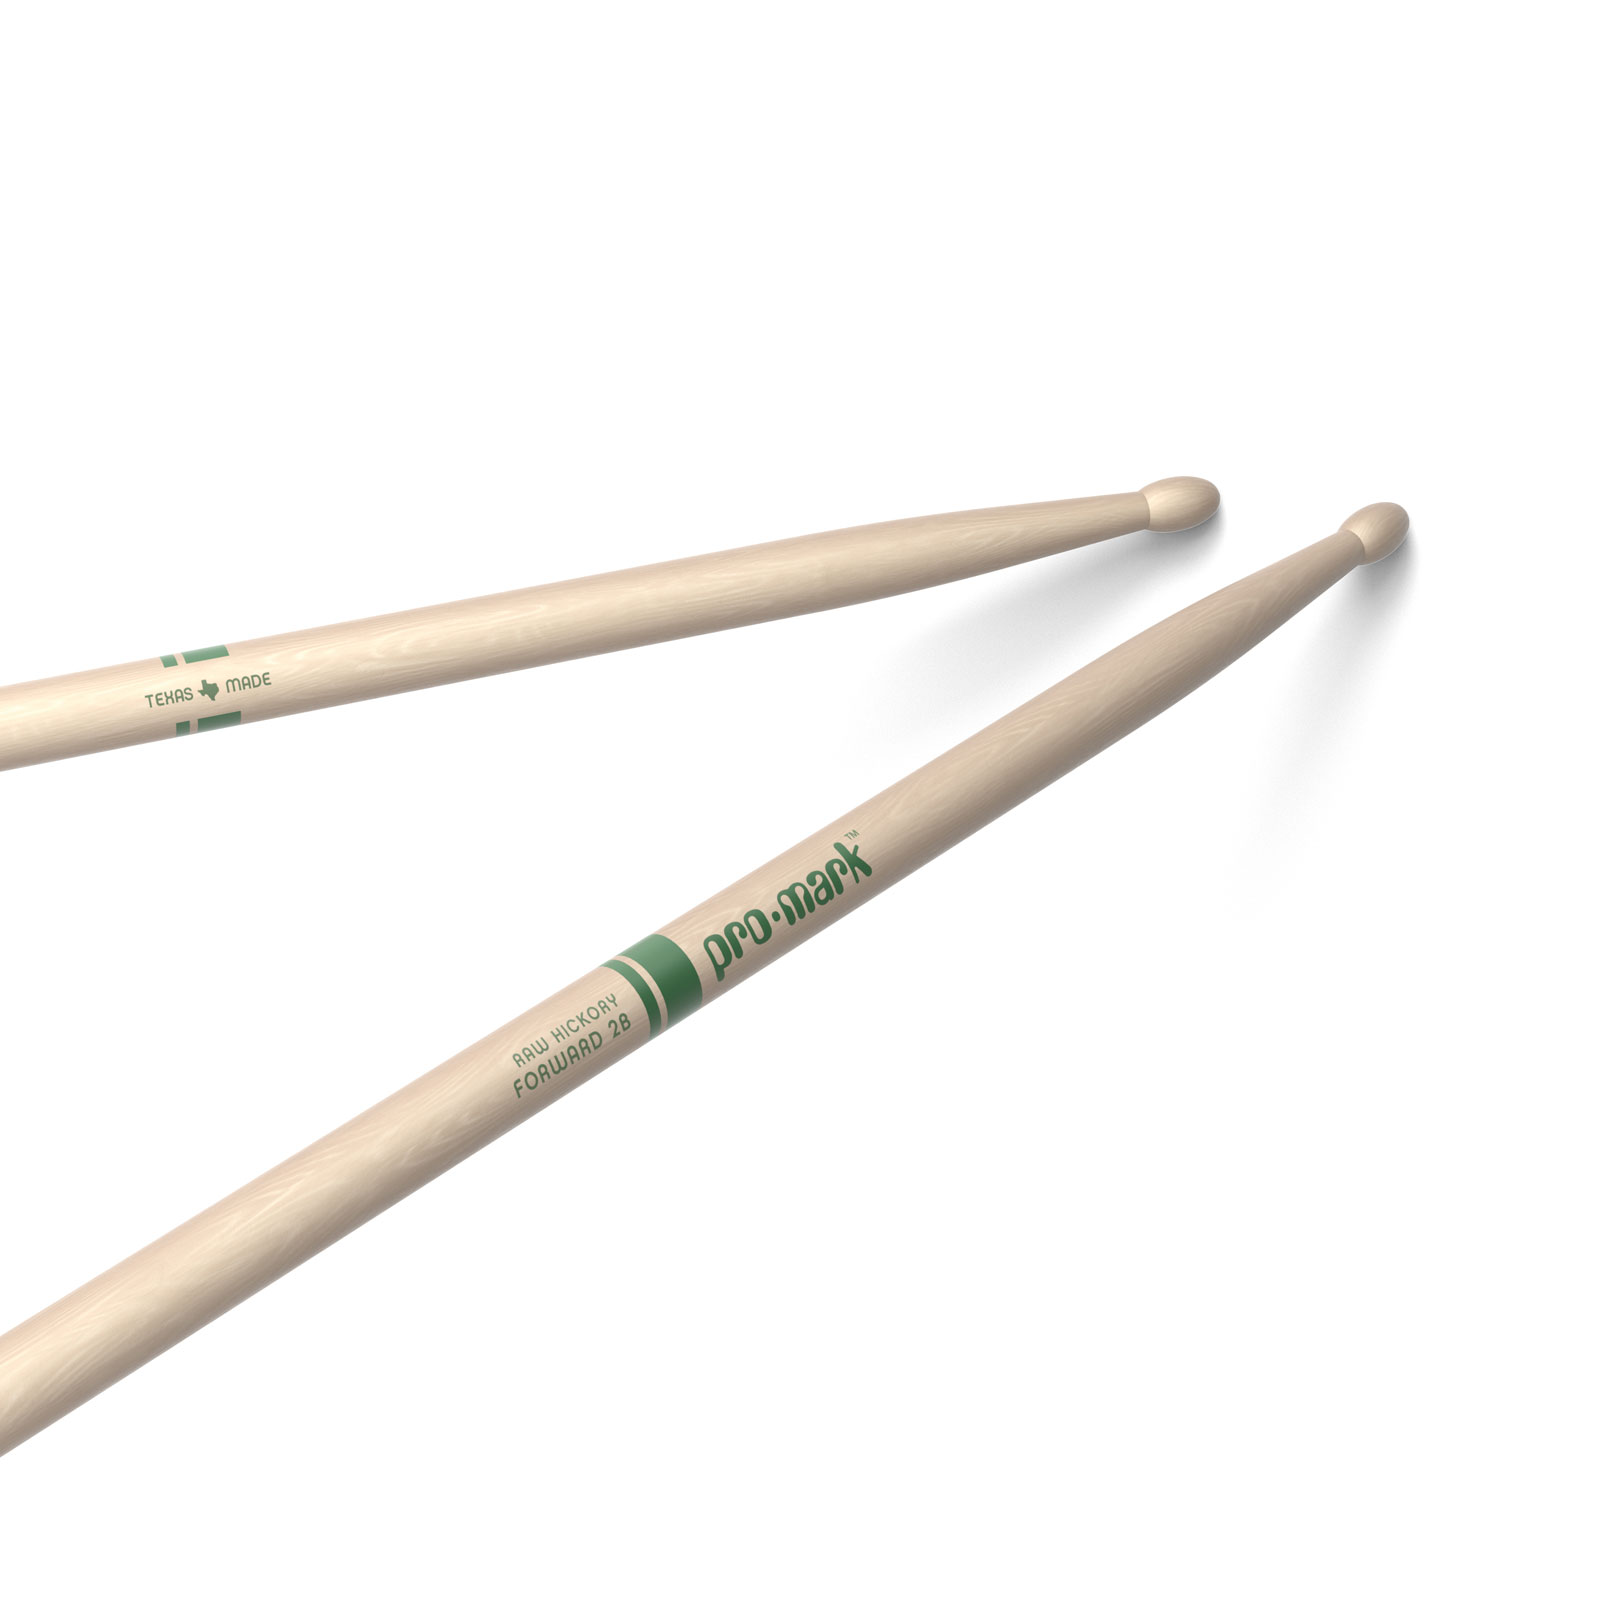 PRO MARK CLASSIC FORWARD 2B RAW HICKORY DRUMSTICK OVAL WOOD TIP